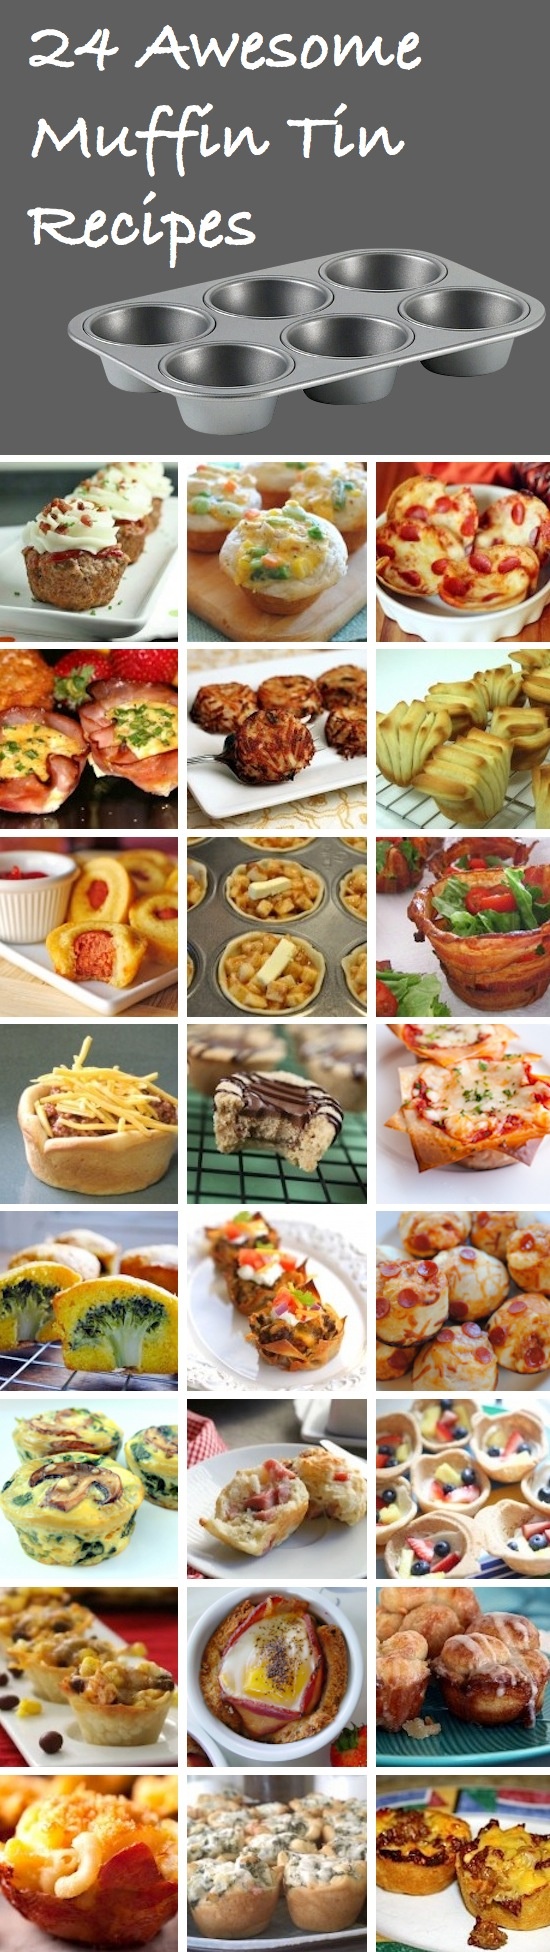 24 Awesome Muffin Tin Recipes